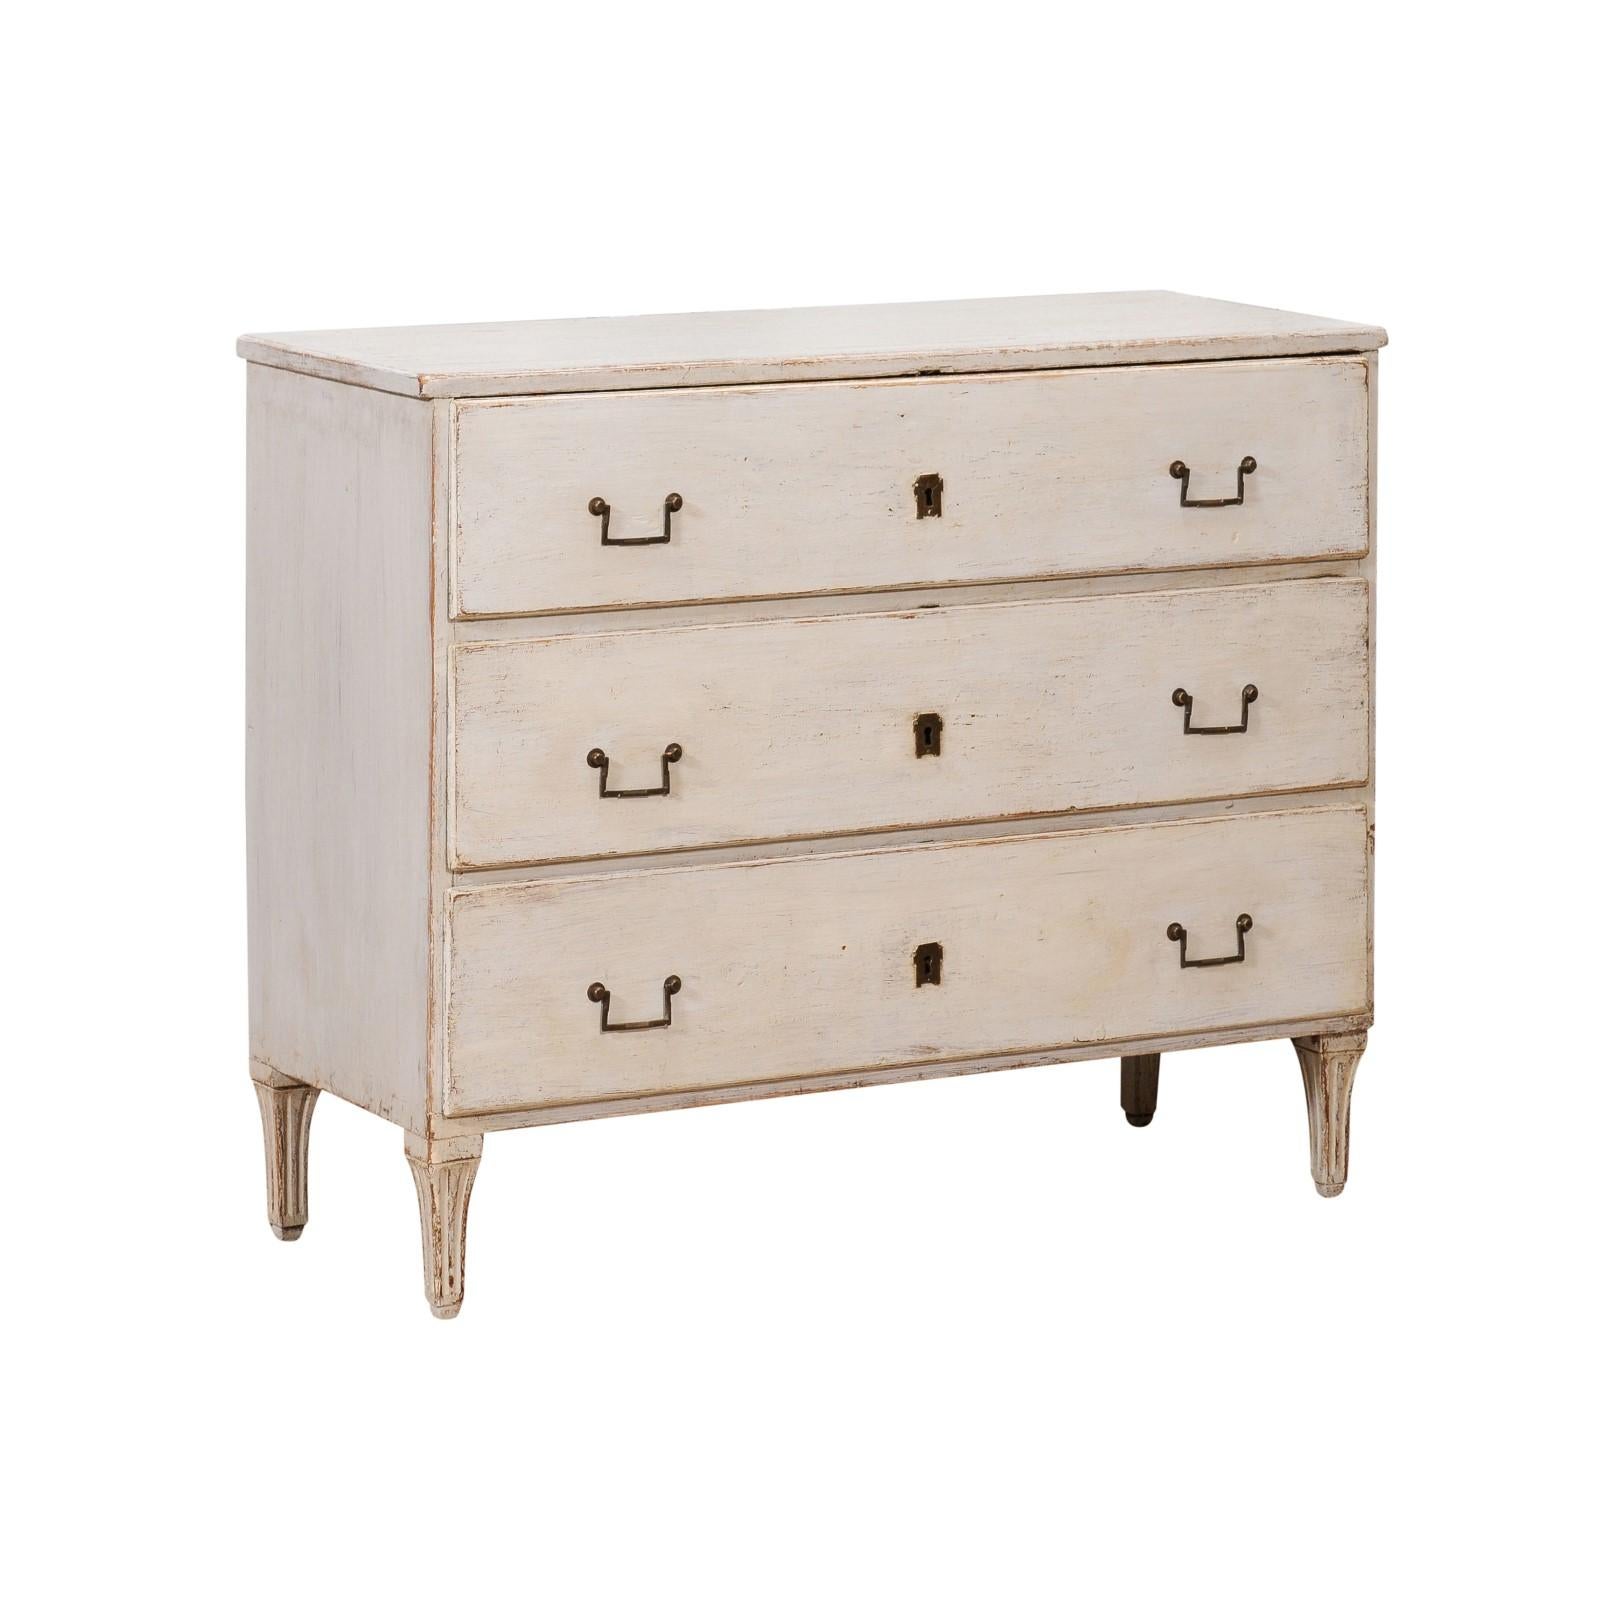 Swedish 1790s Gustavian Period Painted Three-Drawer Chest with Carved Feet For Sale 8